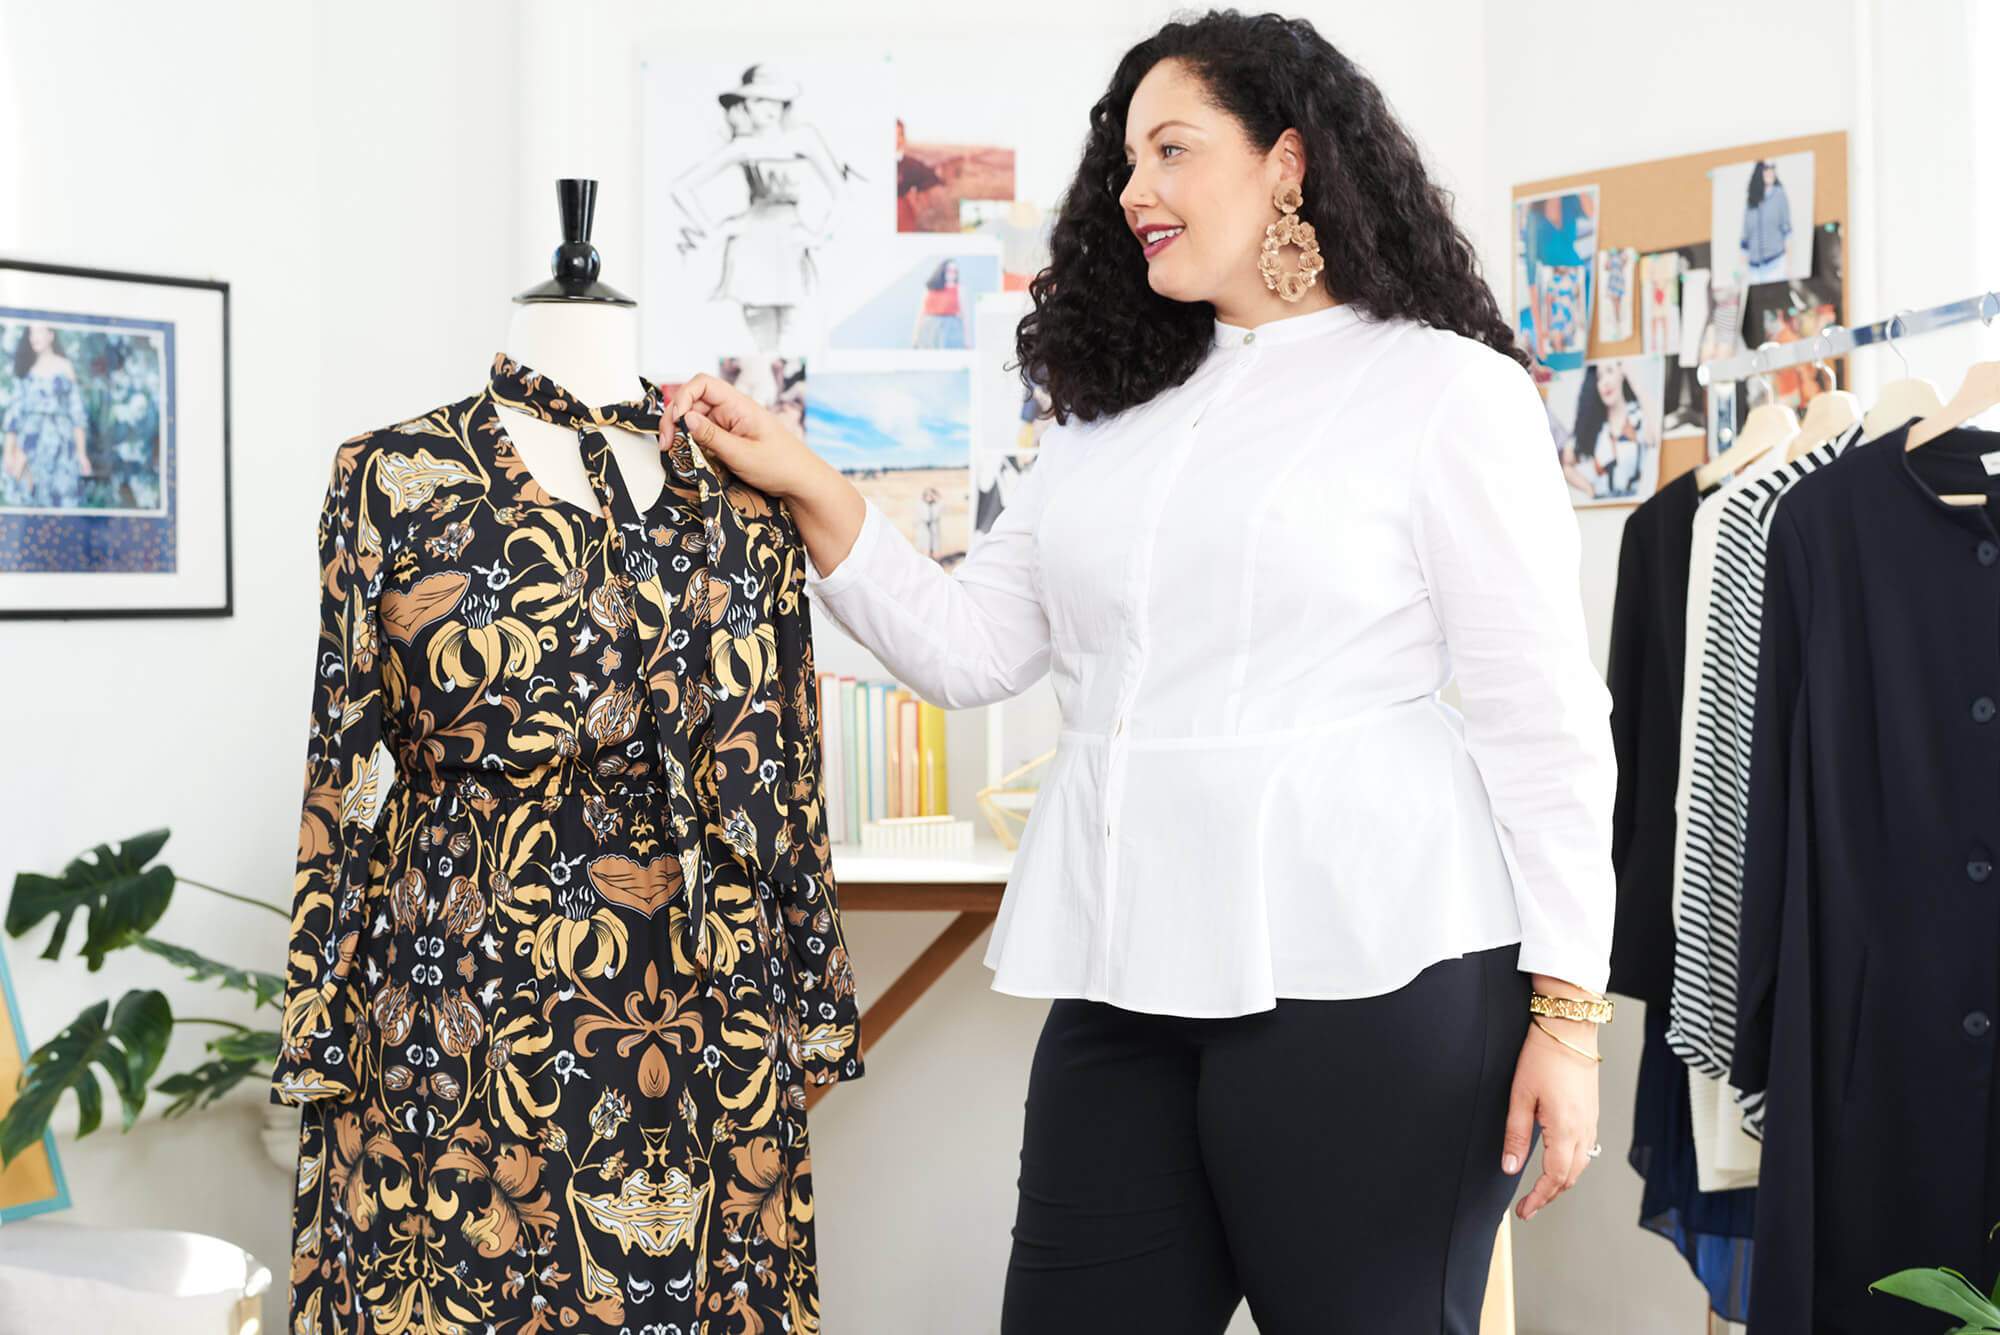 Plus size blogger, Girl With CUrves Teams Up with DIa & Co for her own Capsule Collection